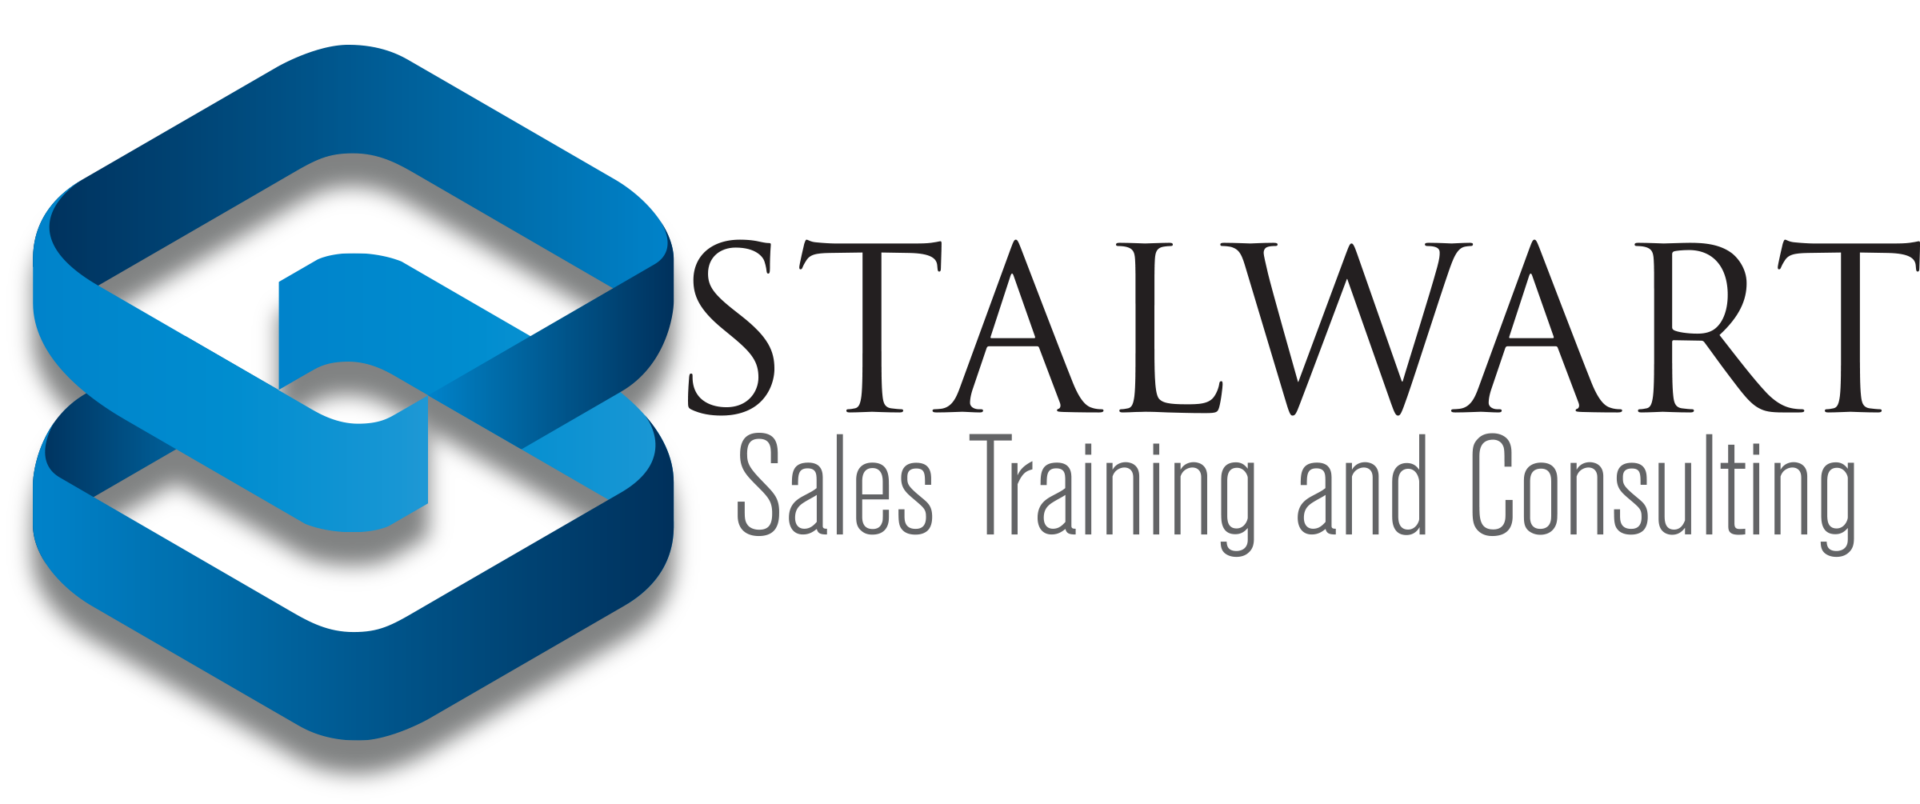 Stalwart Sales Training and Consulting